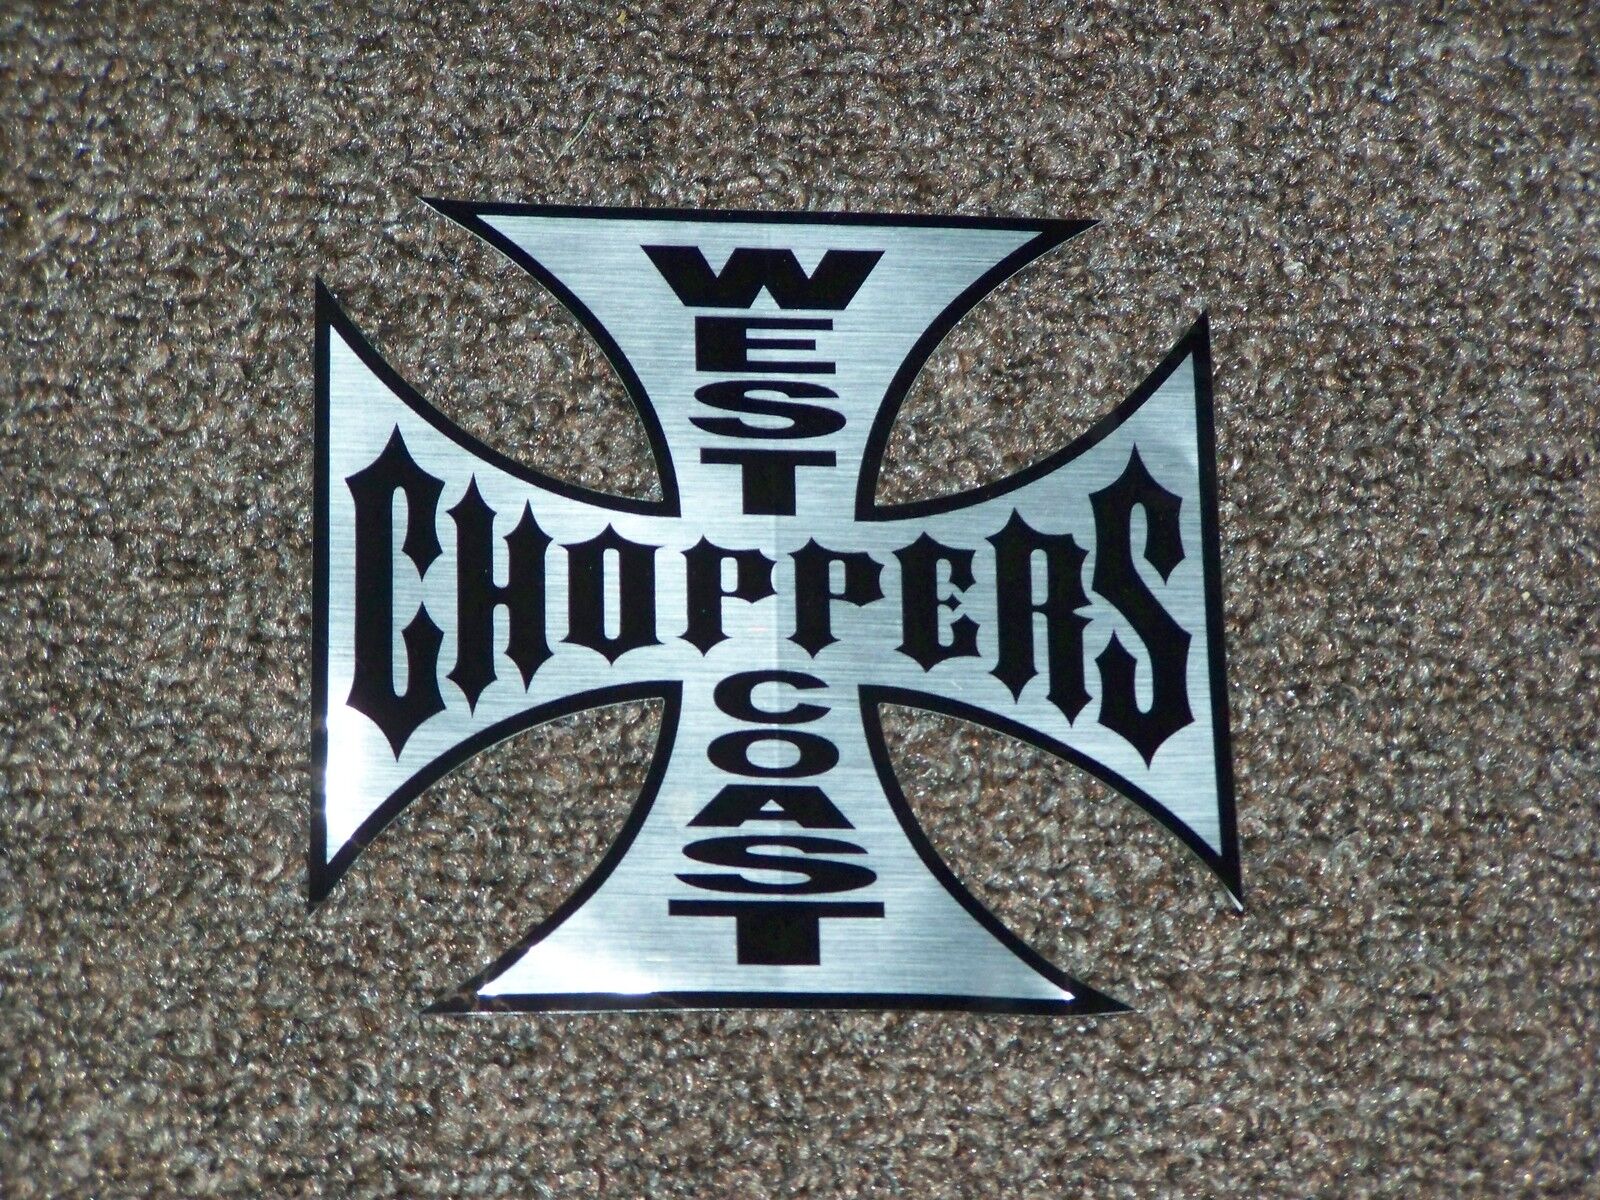 JESSE JAMES CFL WEST COAST CHOPPERS Metal Appear. 6 inch Decal Stickers lot set